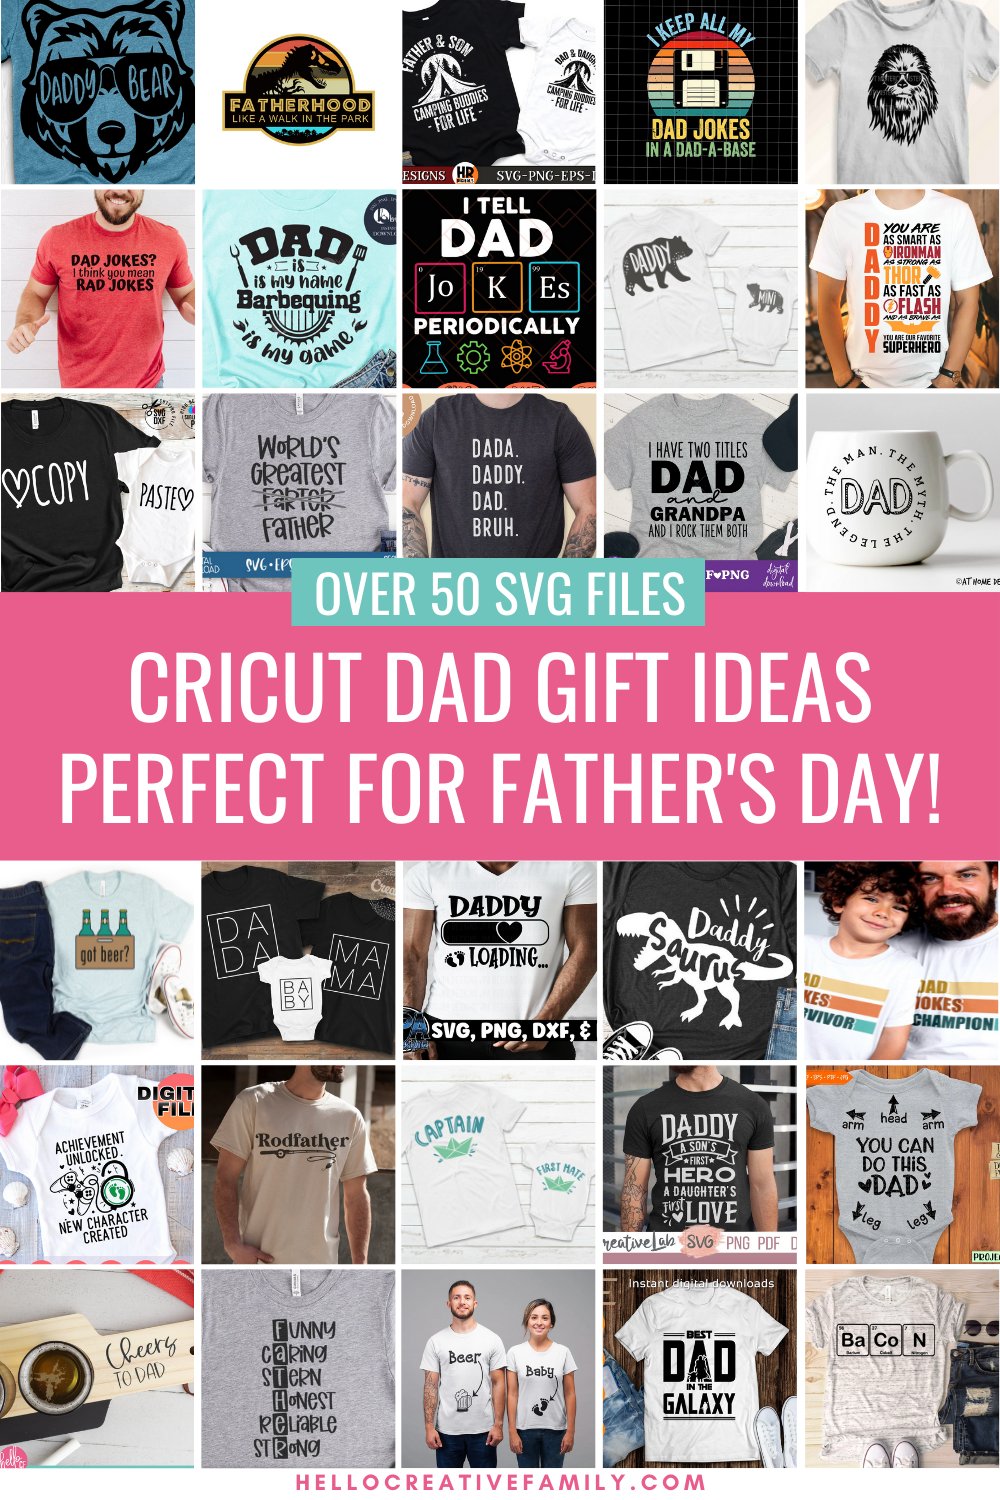 Get inspired! We’ve collected over 50 Dad SVG files for making Cricut Dad gifts using your Cricut Maker, Cricut Explore, Cricut Joy, Silhouette Cameo or other electronic cutting machine! From funny dad shirts, to sentimental dad mugs, to sport gear that dad can wear on game day! We’ve got a ton of great ideas for Father’s Day, Christmas, birthdays or any time of the year you want to celebrate the best dad ever!